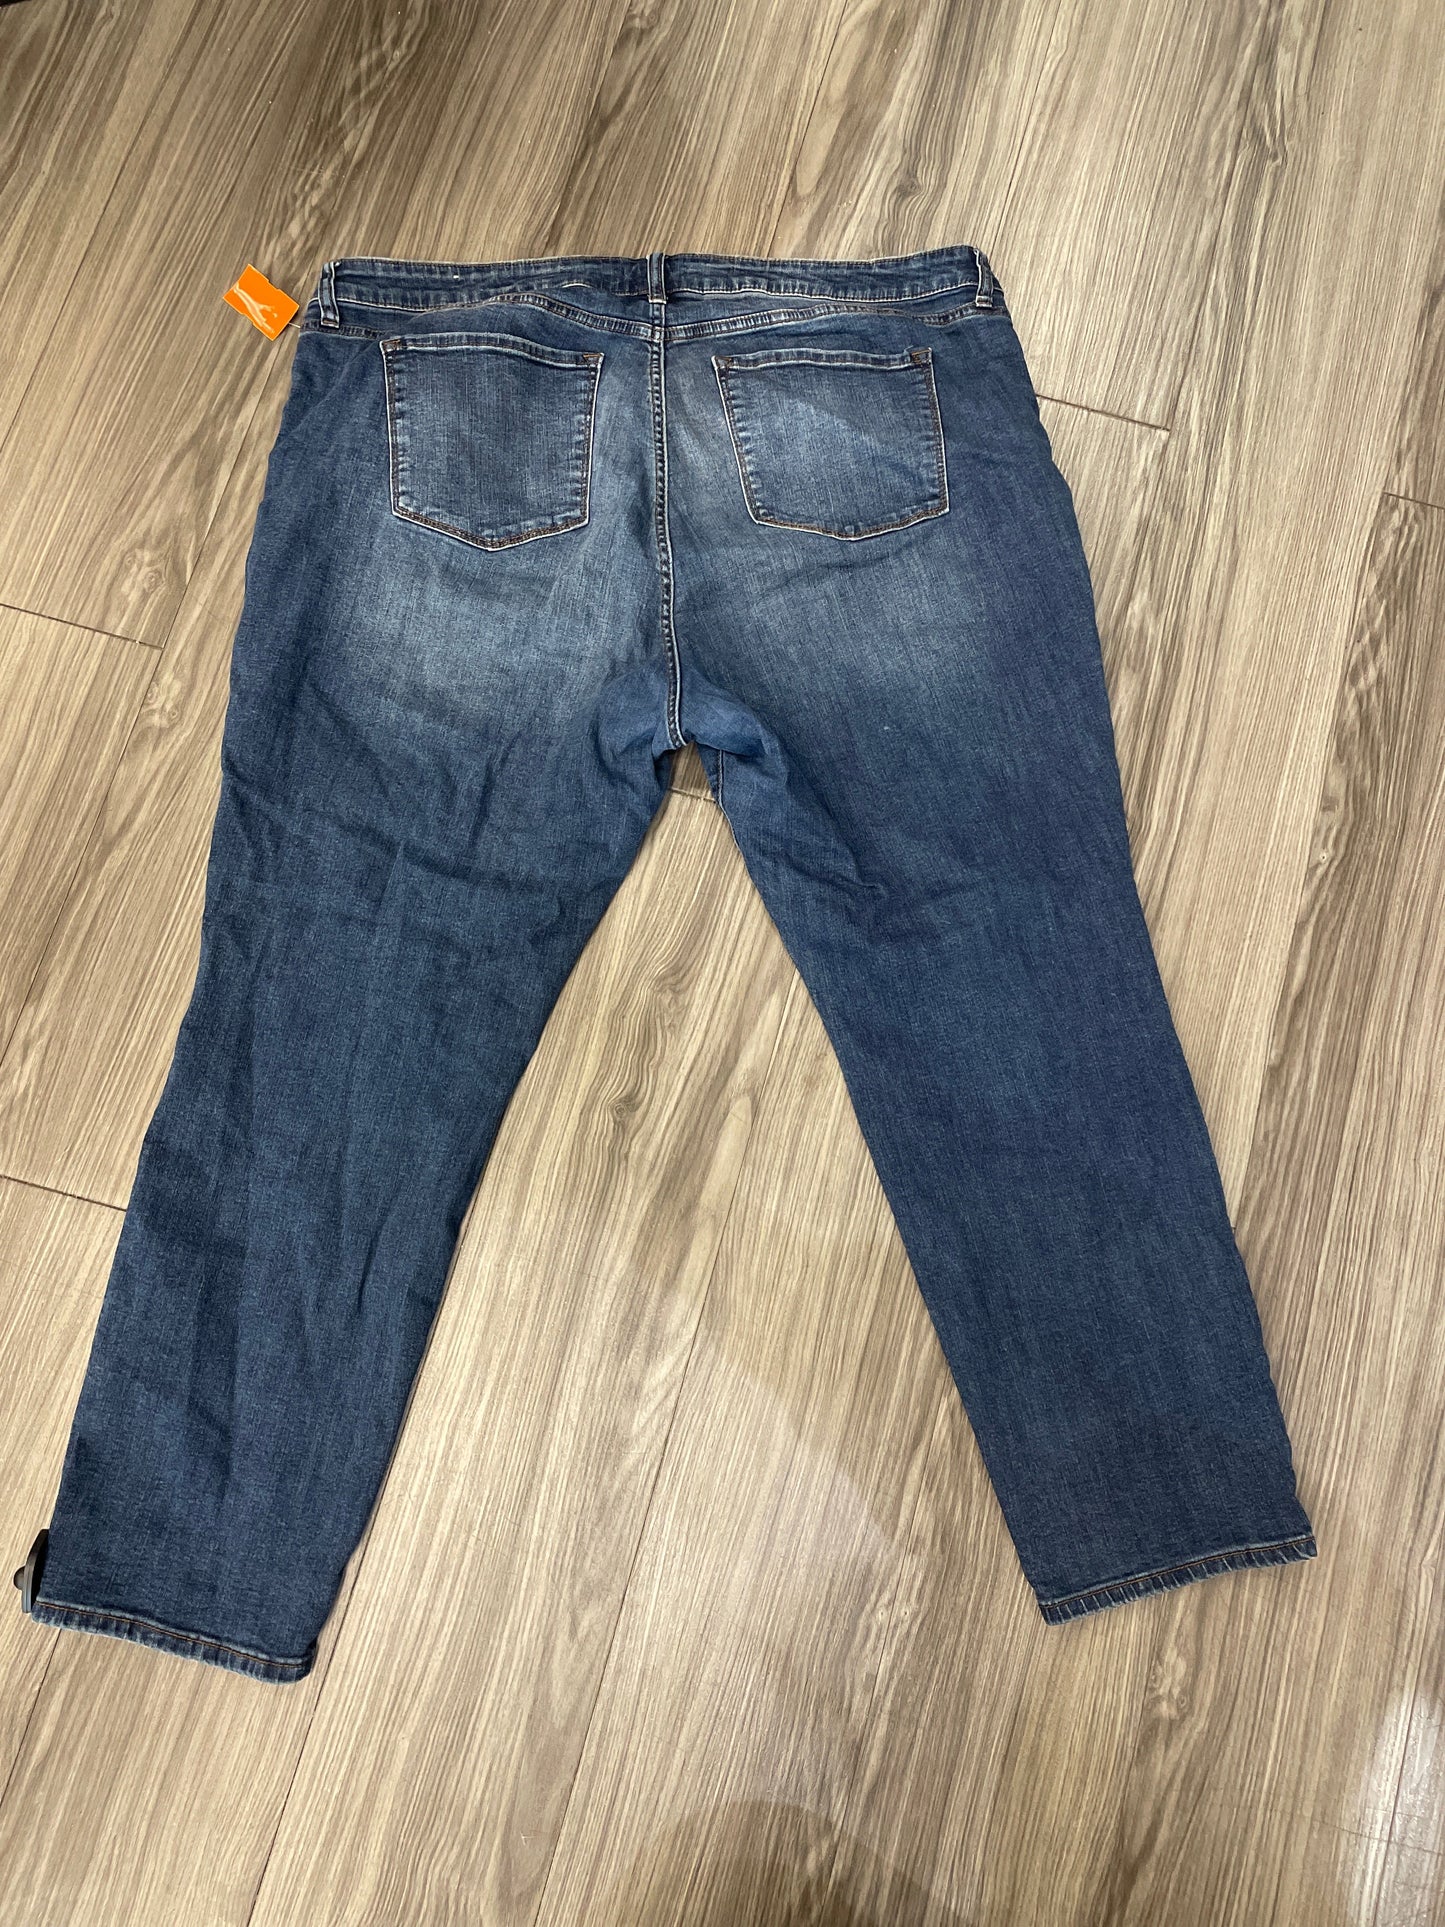 Jeans Skinny By Sts Blue  Size: 24